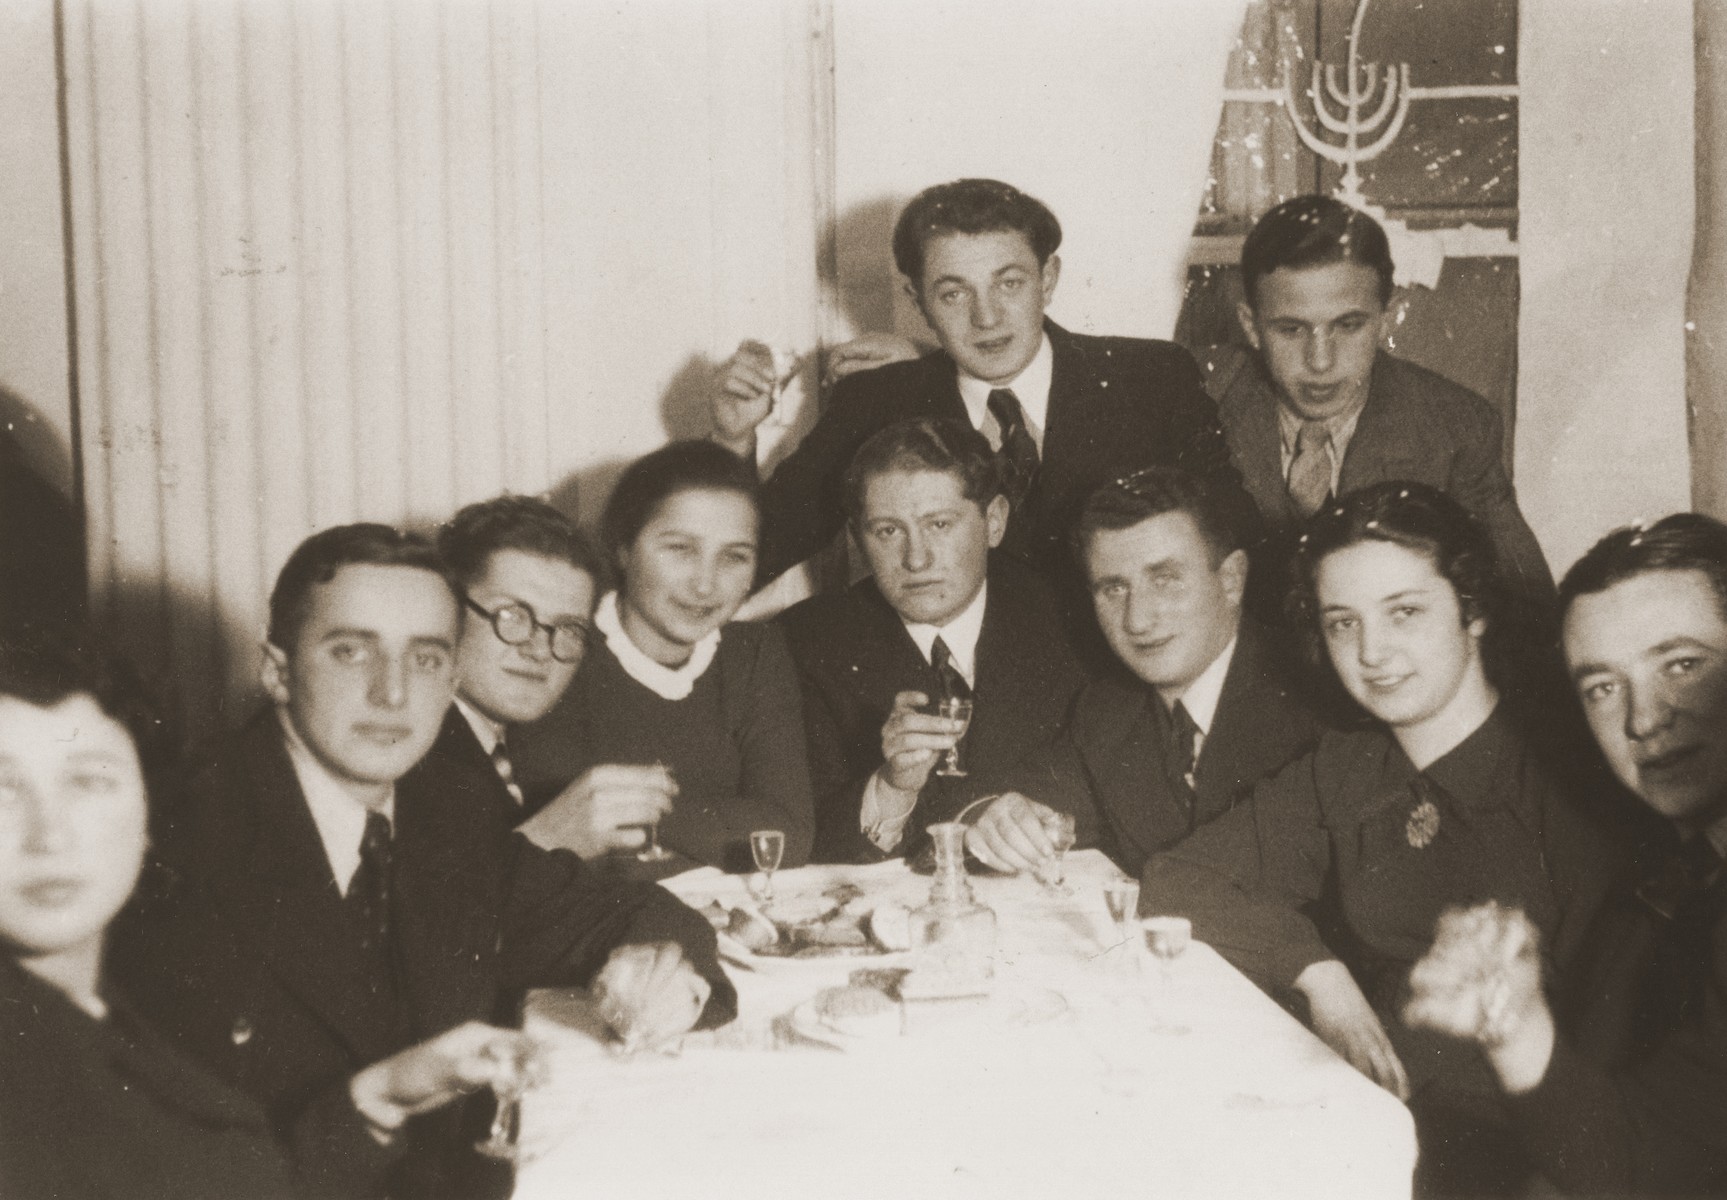 A group of Jewish friends gather in a private home for a farewell party for Rivka Radzinski prior to her departure for Palestine.

Rivka is pictured second from the right.  The photograph is inscribed to Rivka by her friend, Itzhak.